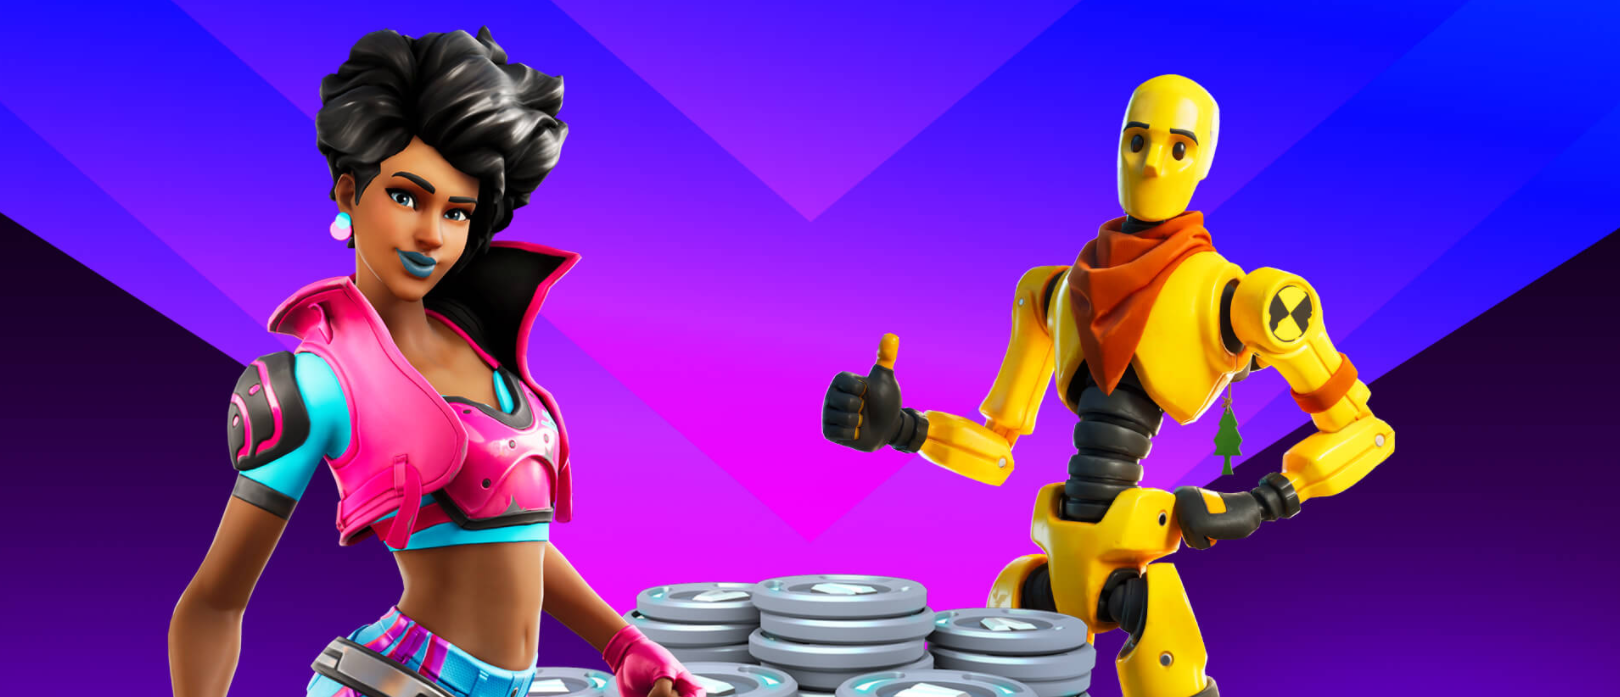 Epic is daring Apple and Google to ban Fortnite from their app stores — and Apple just took the bait